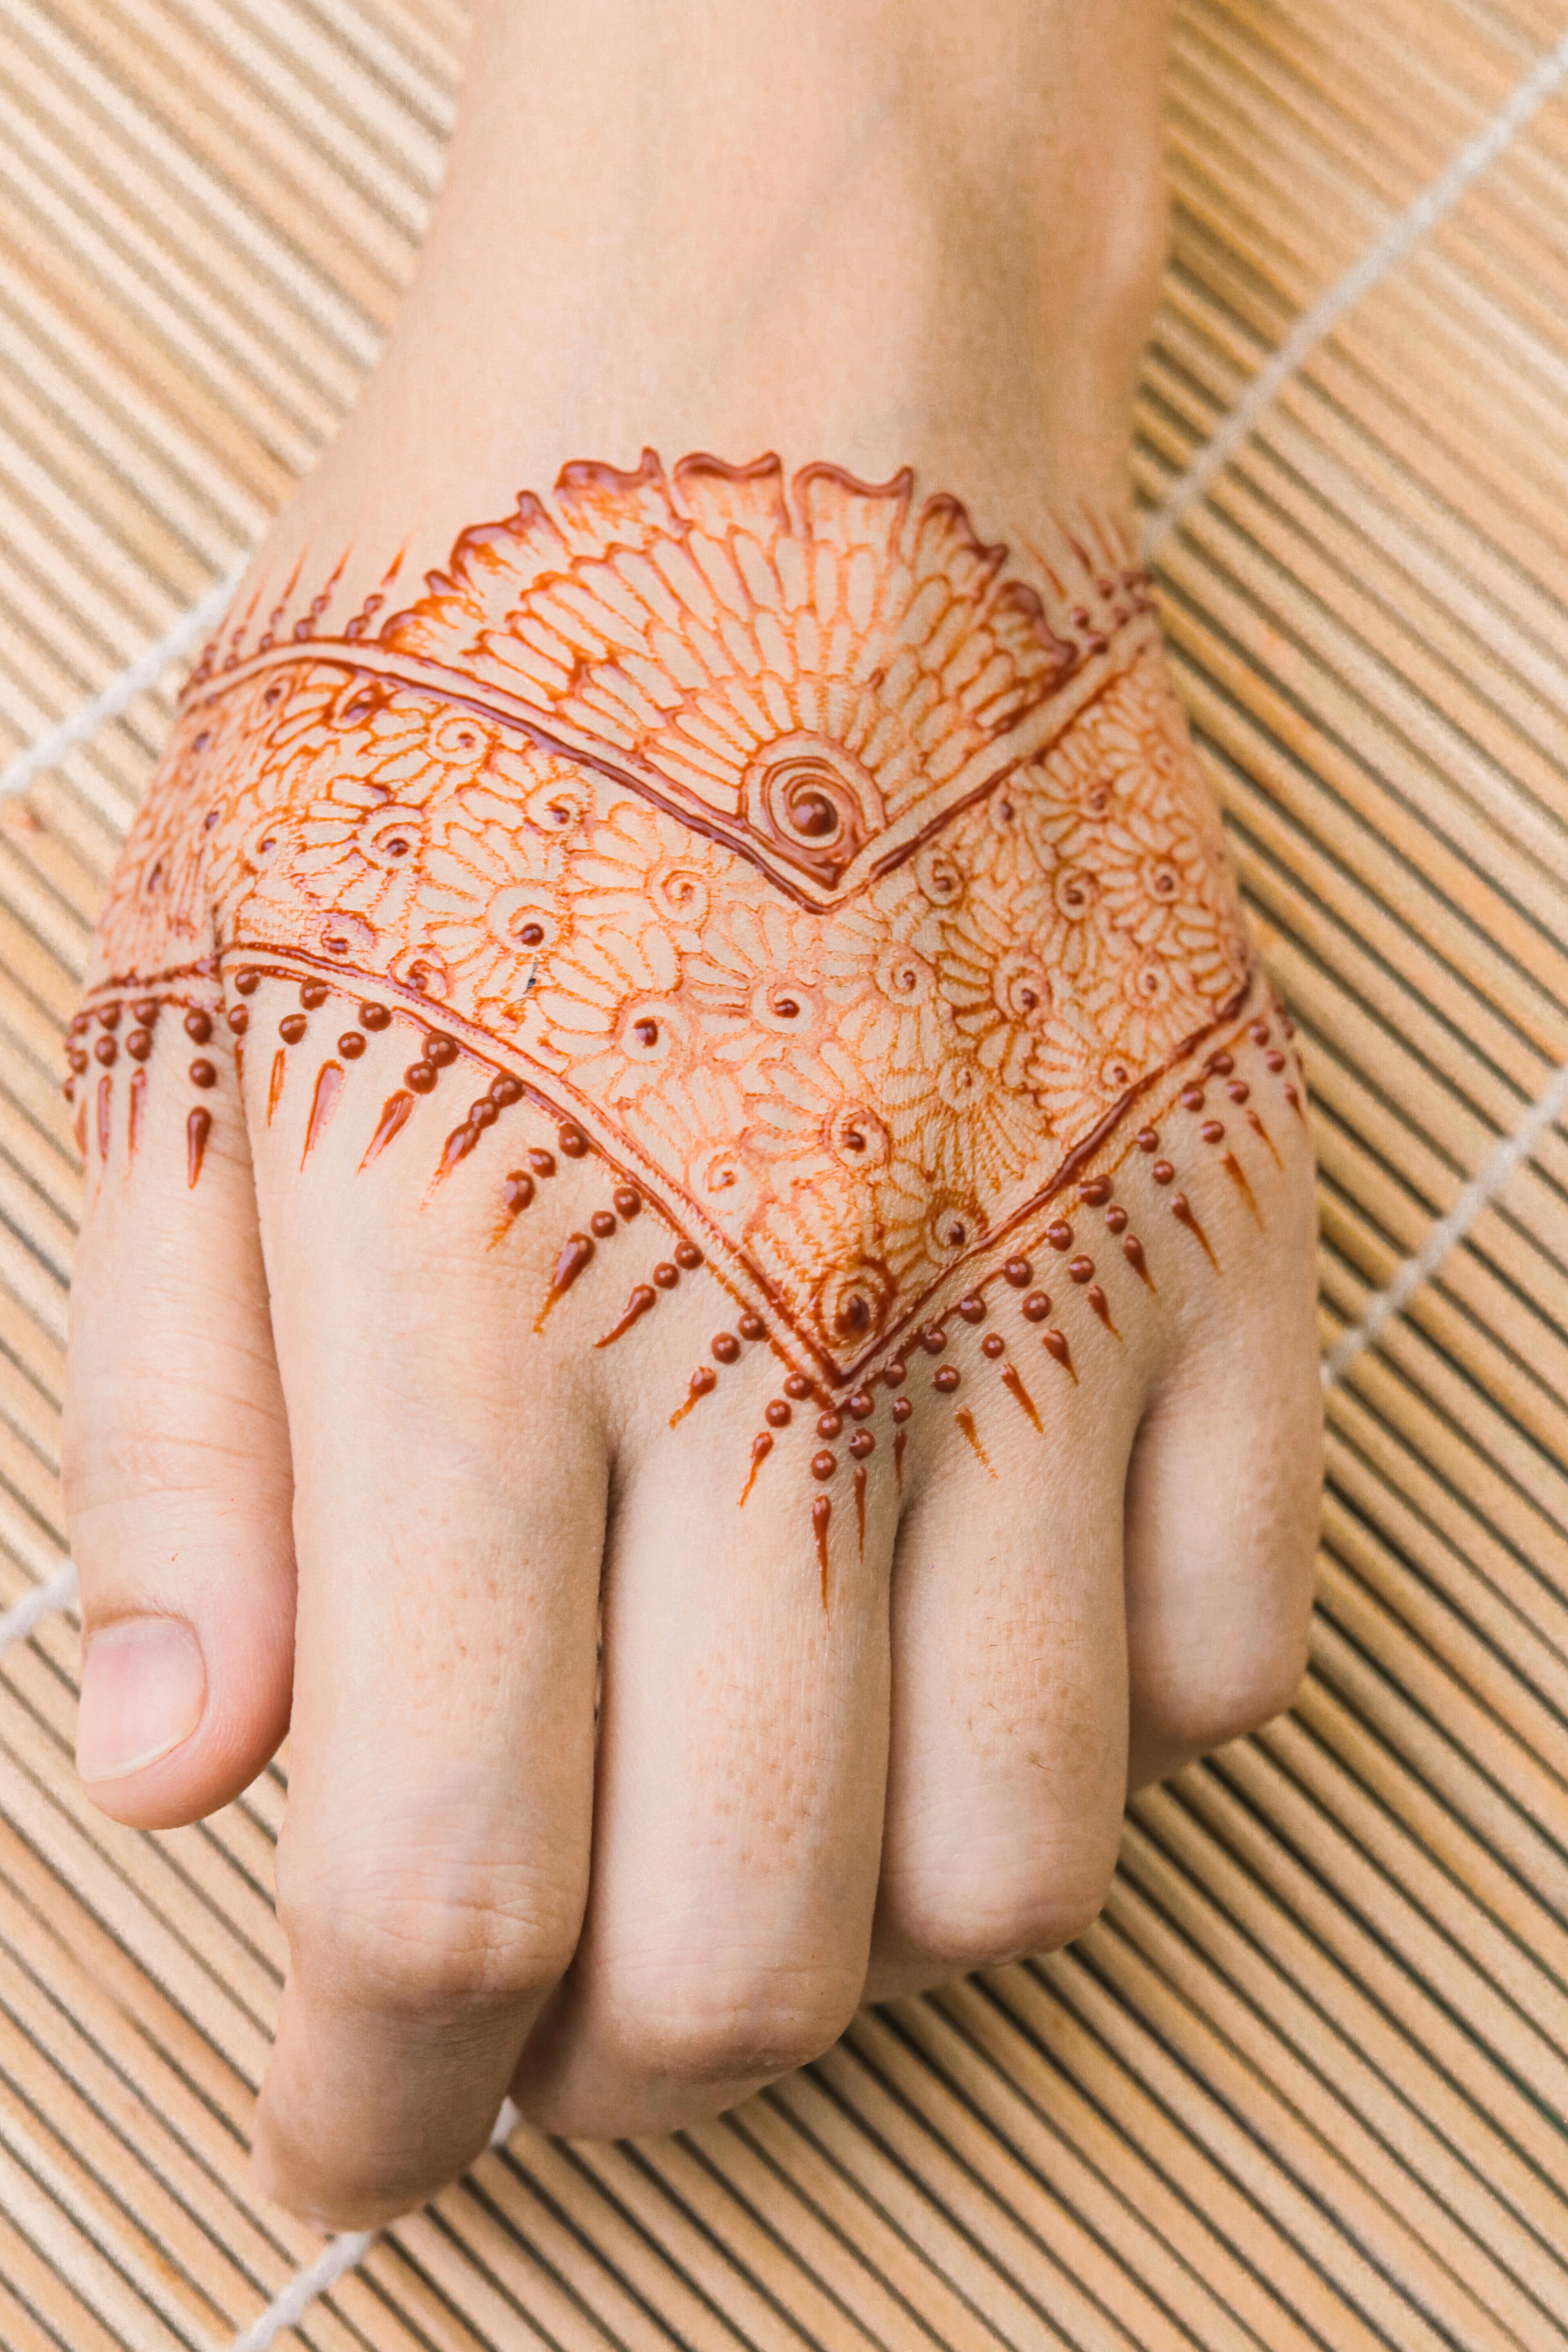 Premium Photo | A woman shows her henna tattoo on her hand.